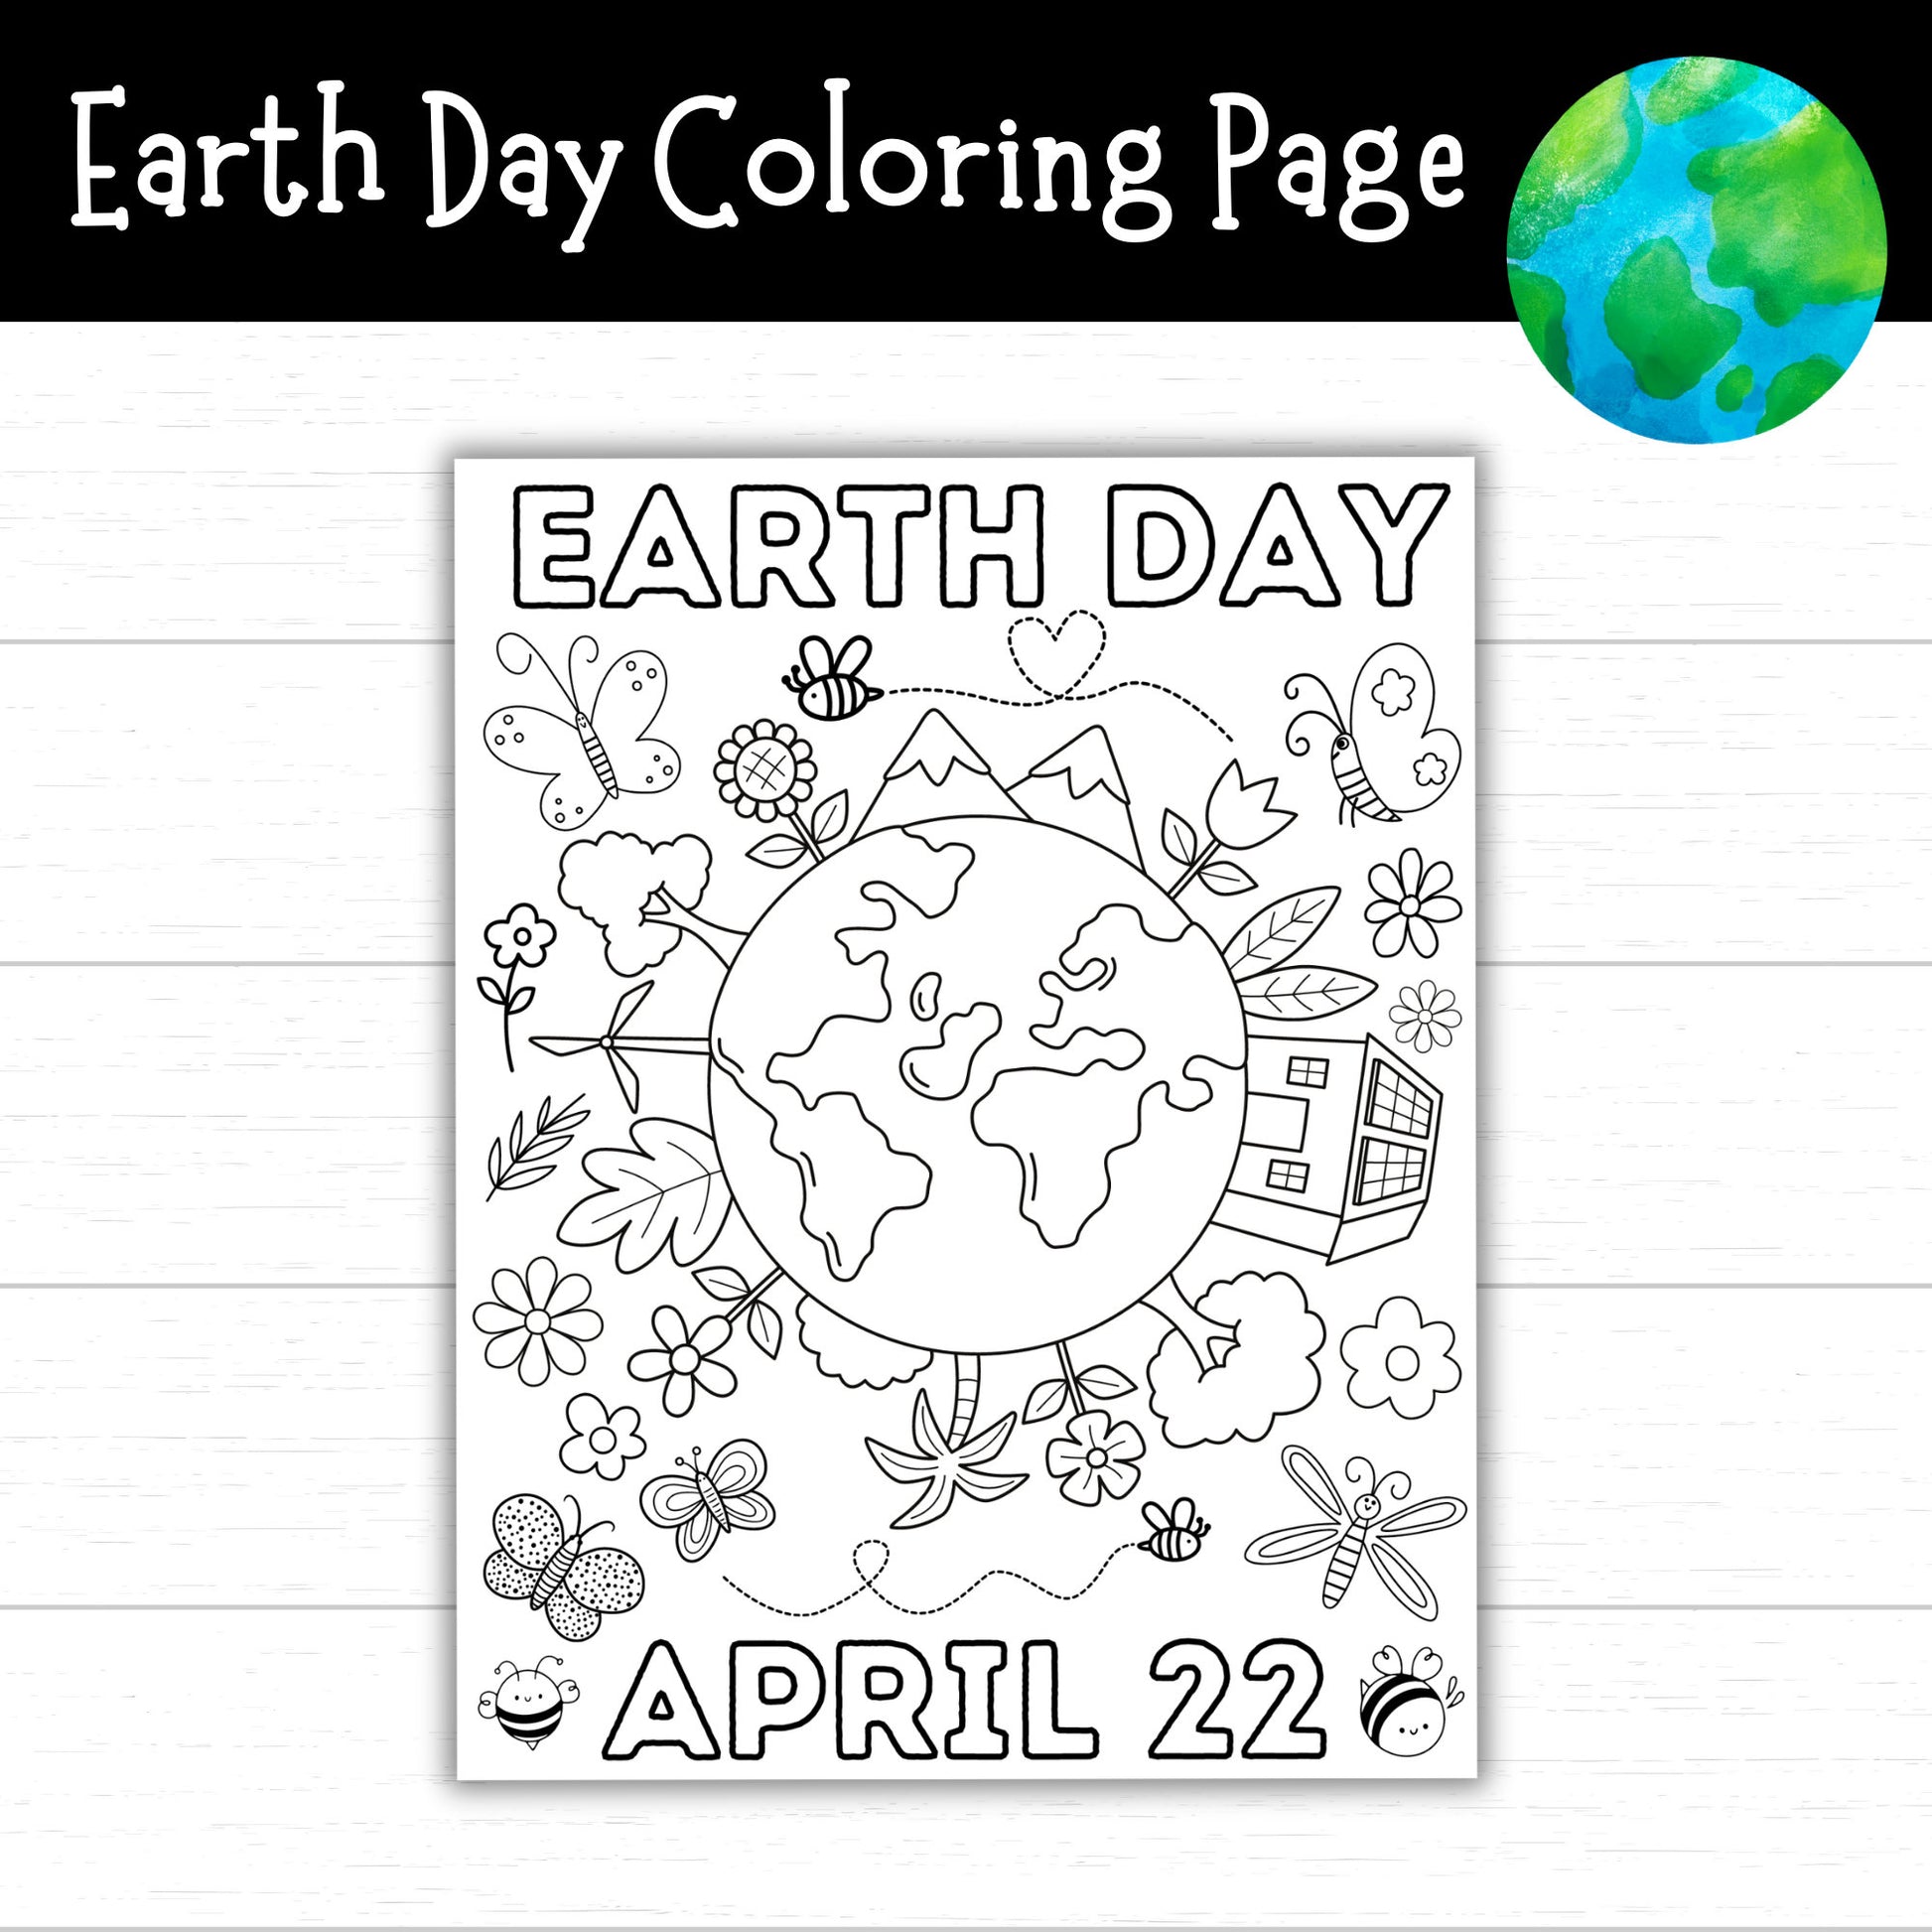 Earth Day Coloring Page, Coloring Pages for Kids, Celebrate Earth Day, April 22, Earth Day Activity, Nature Activity, Activity Sheet